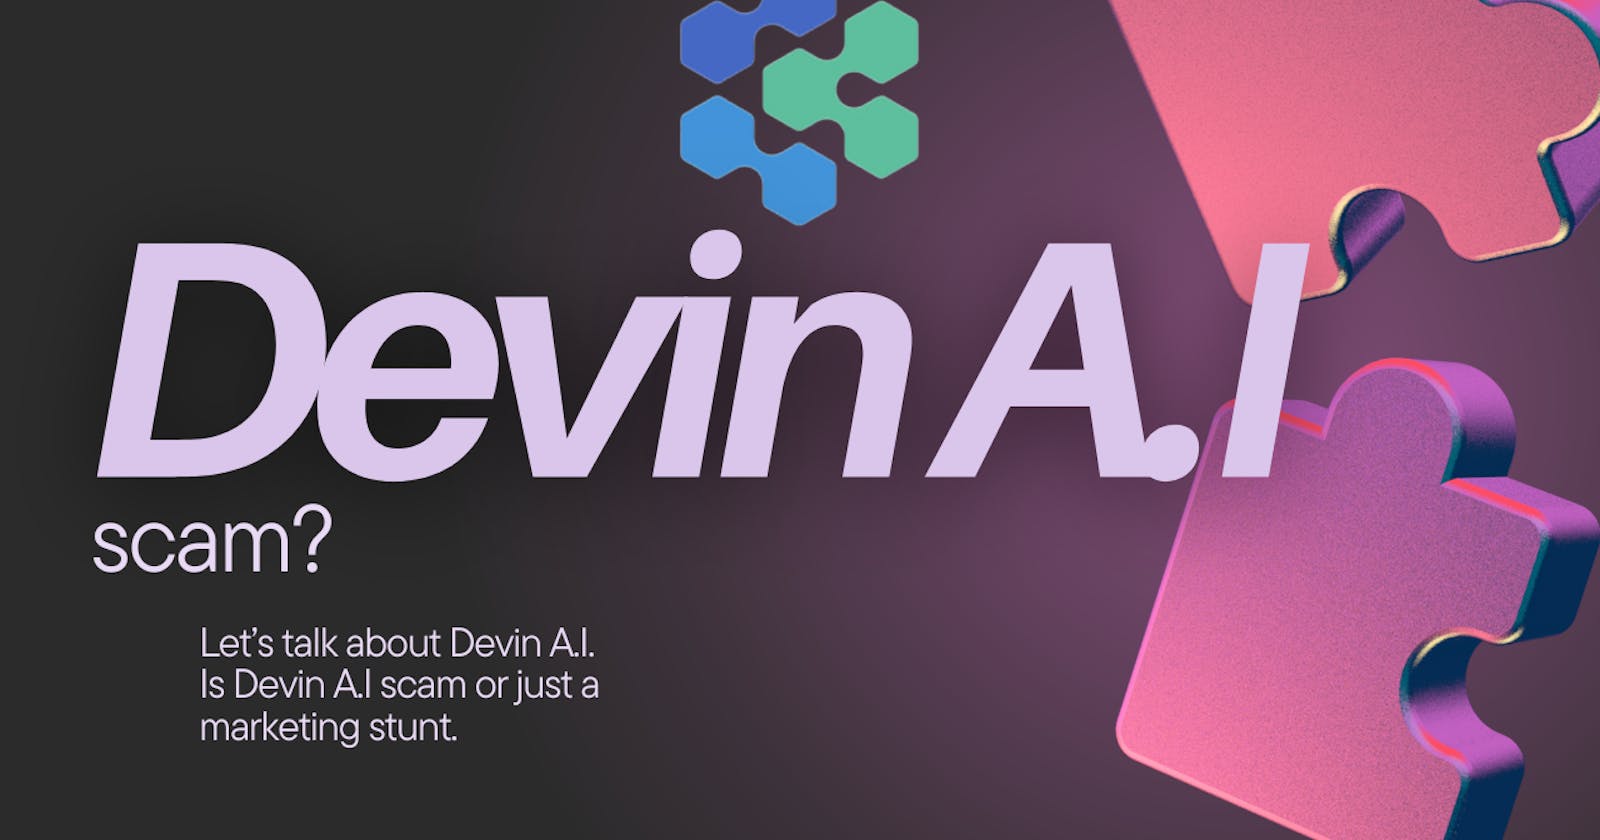 Is the Devin AI Scam?